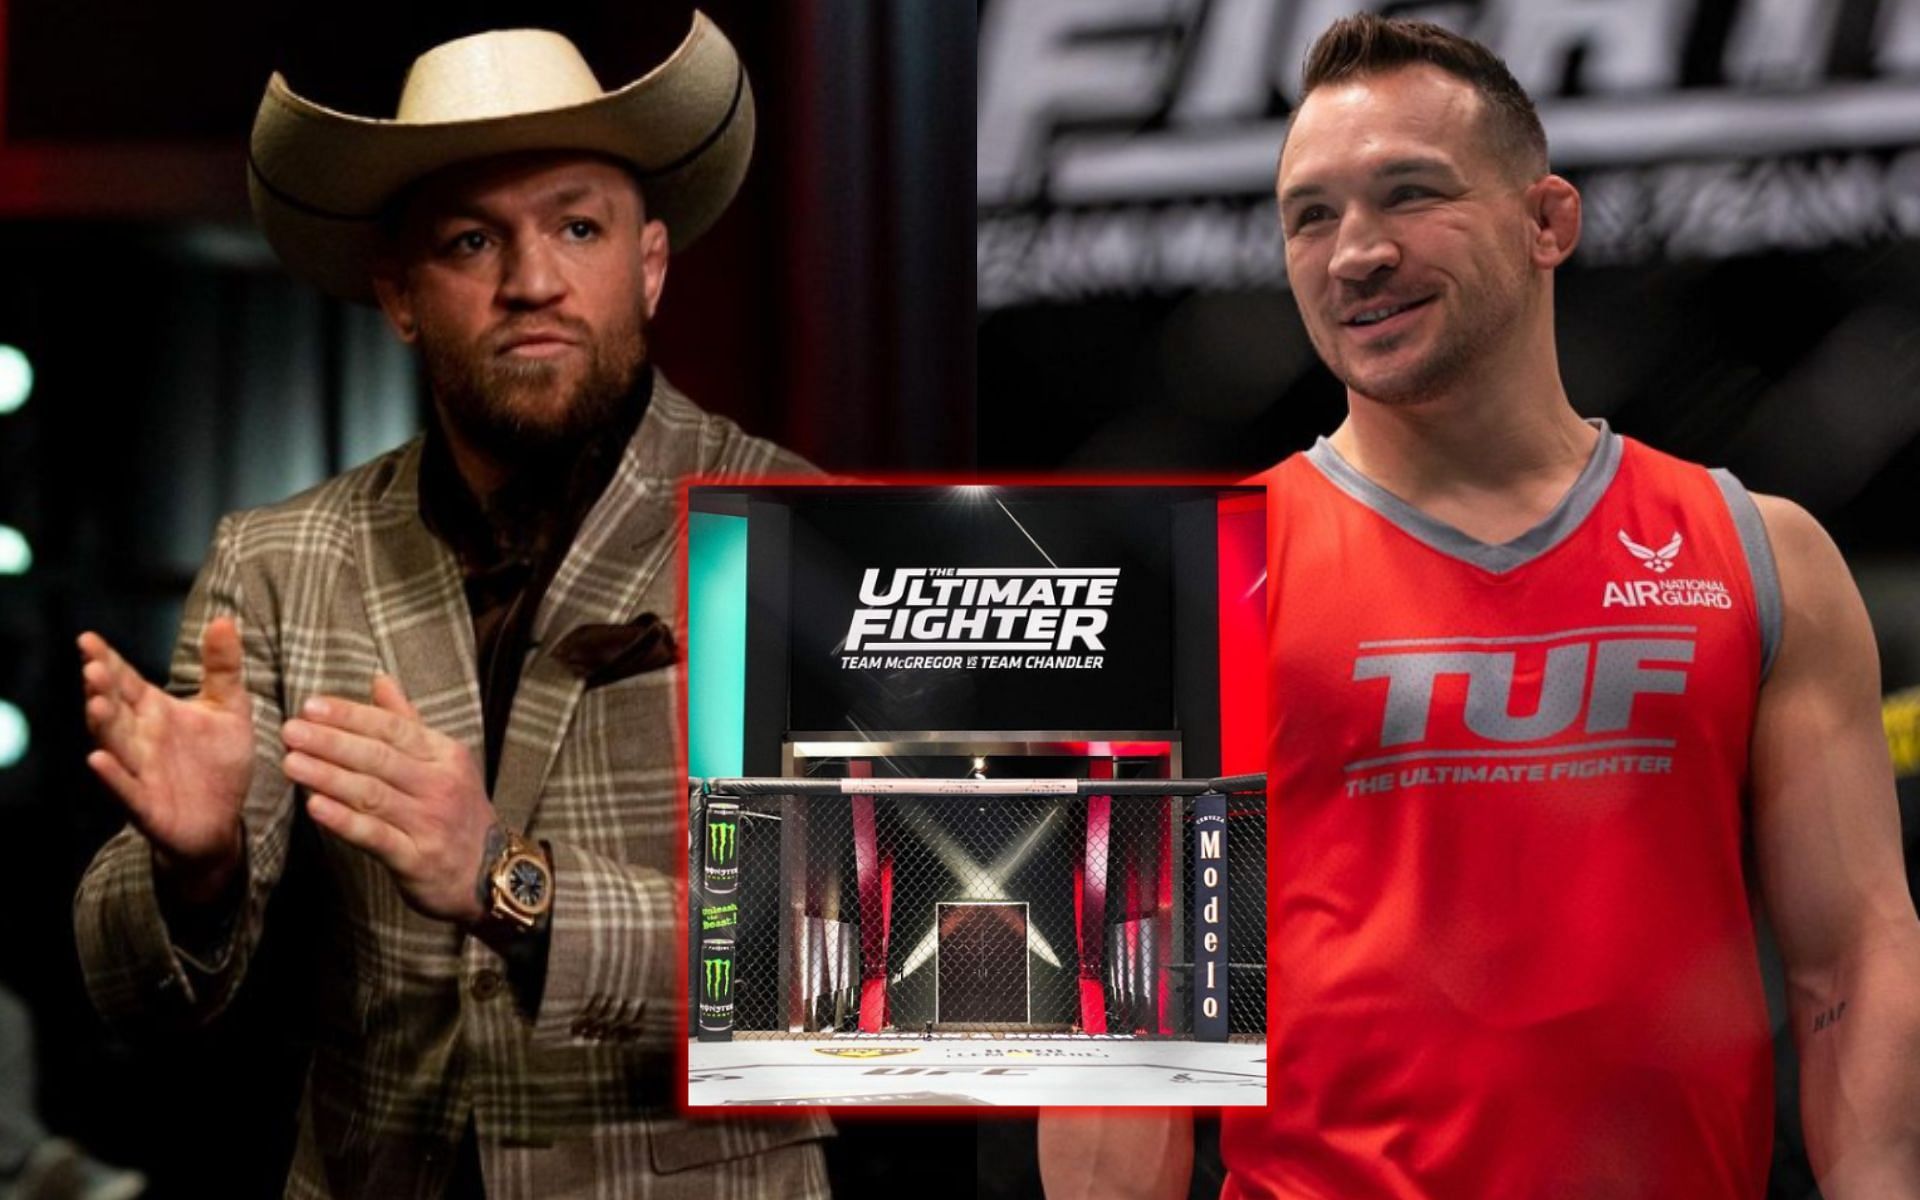 Conor McGregor (Left) and Michael Chandler (Right) [Images via: @ultimatefighter on Instagram]